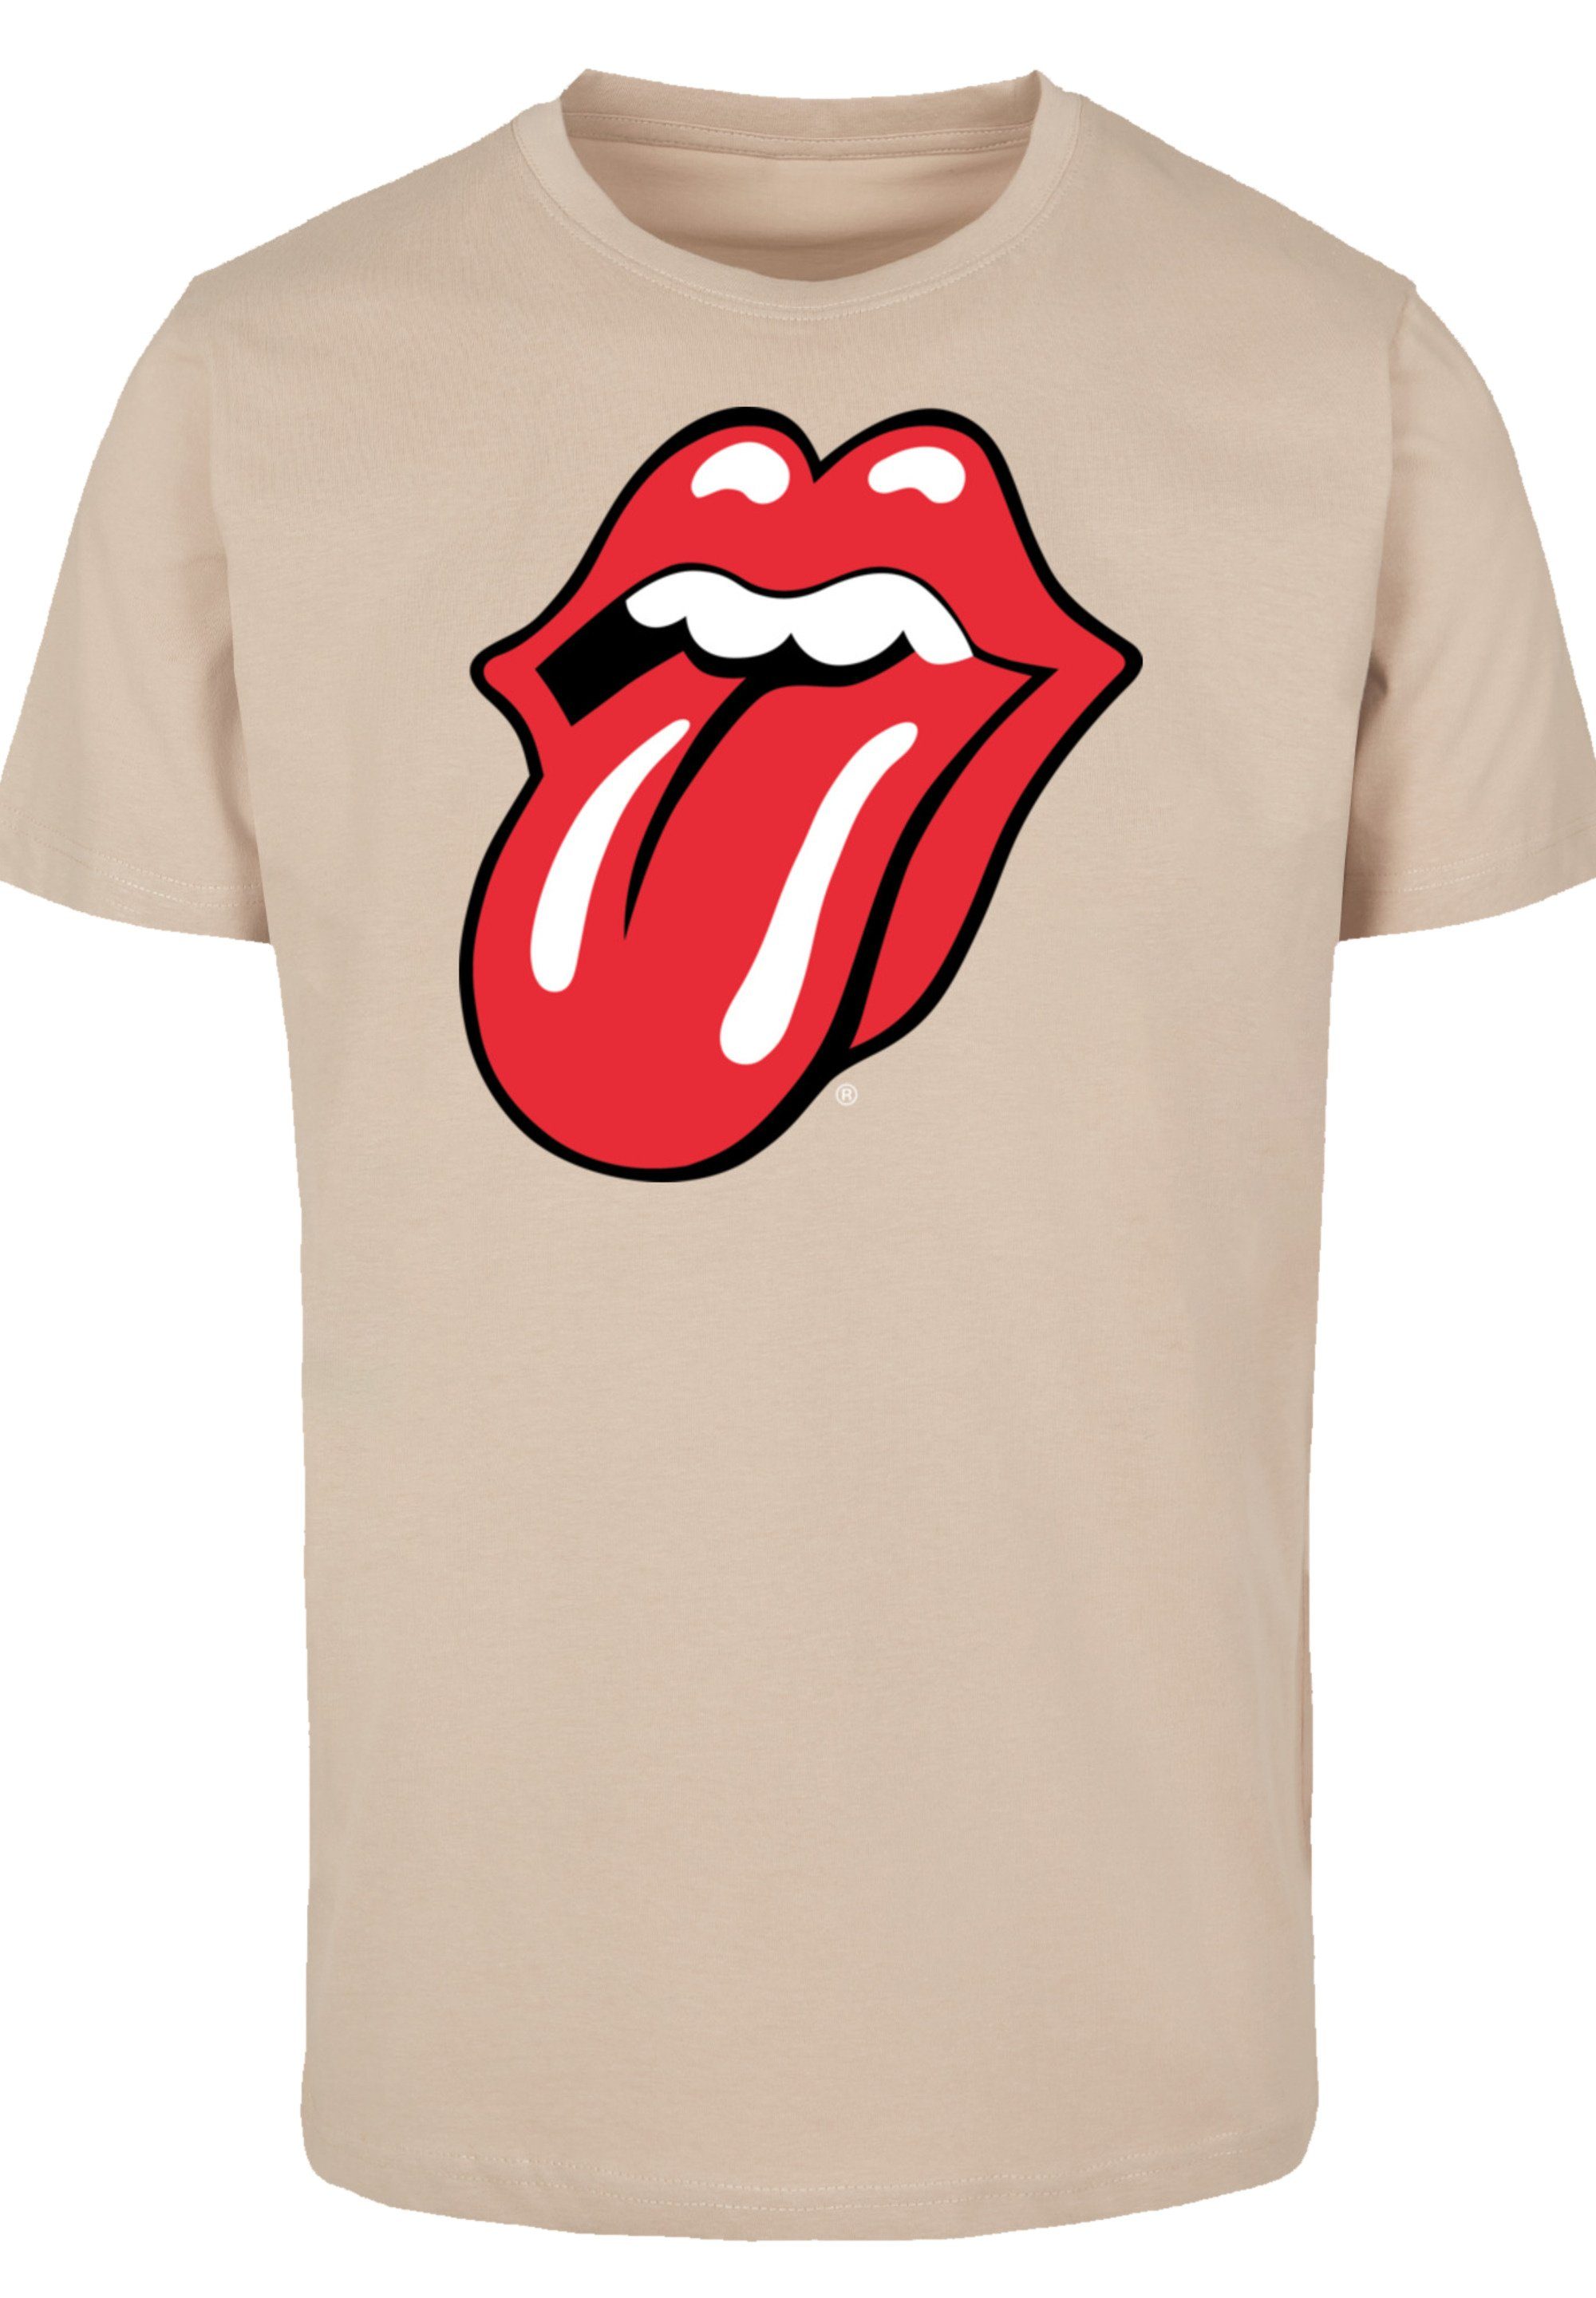 Rolling T-Shirt Stones The Offiziell T-Shirt Zunge F4NT4STIC lizenziertes Print, Rolling The Rote Stones